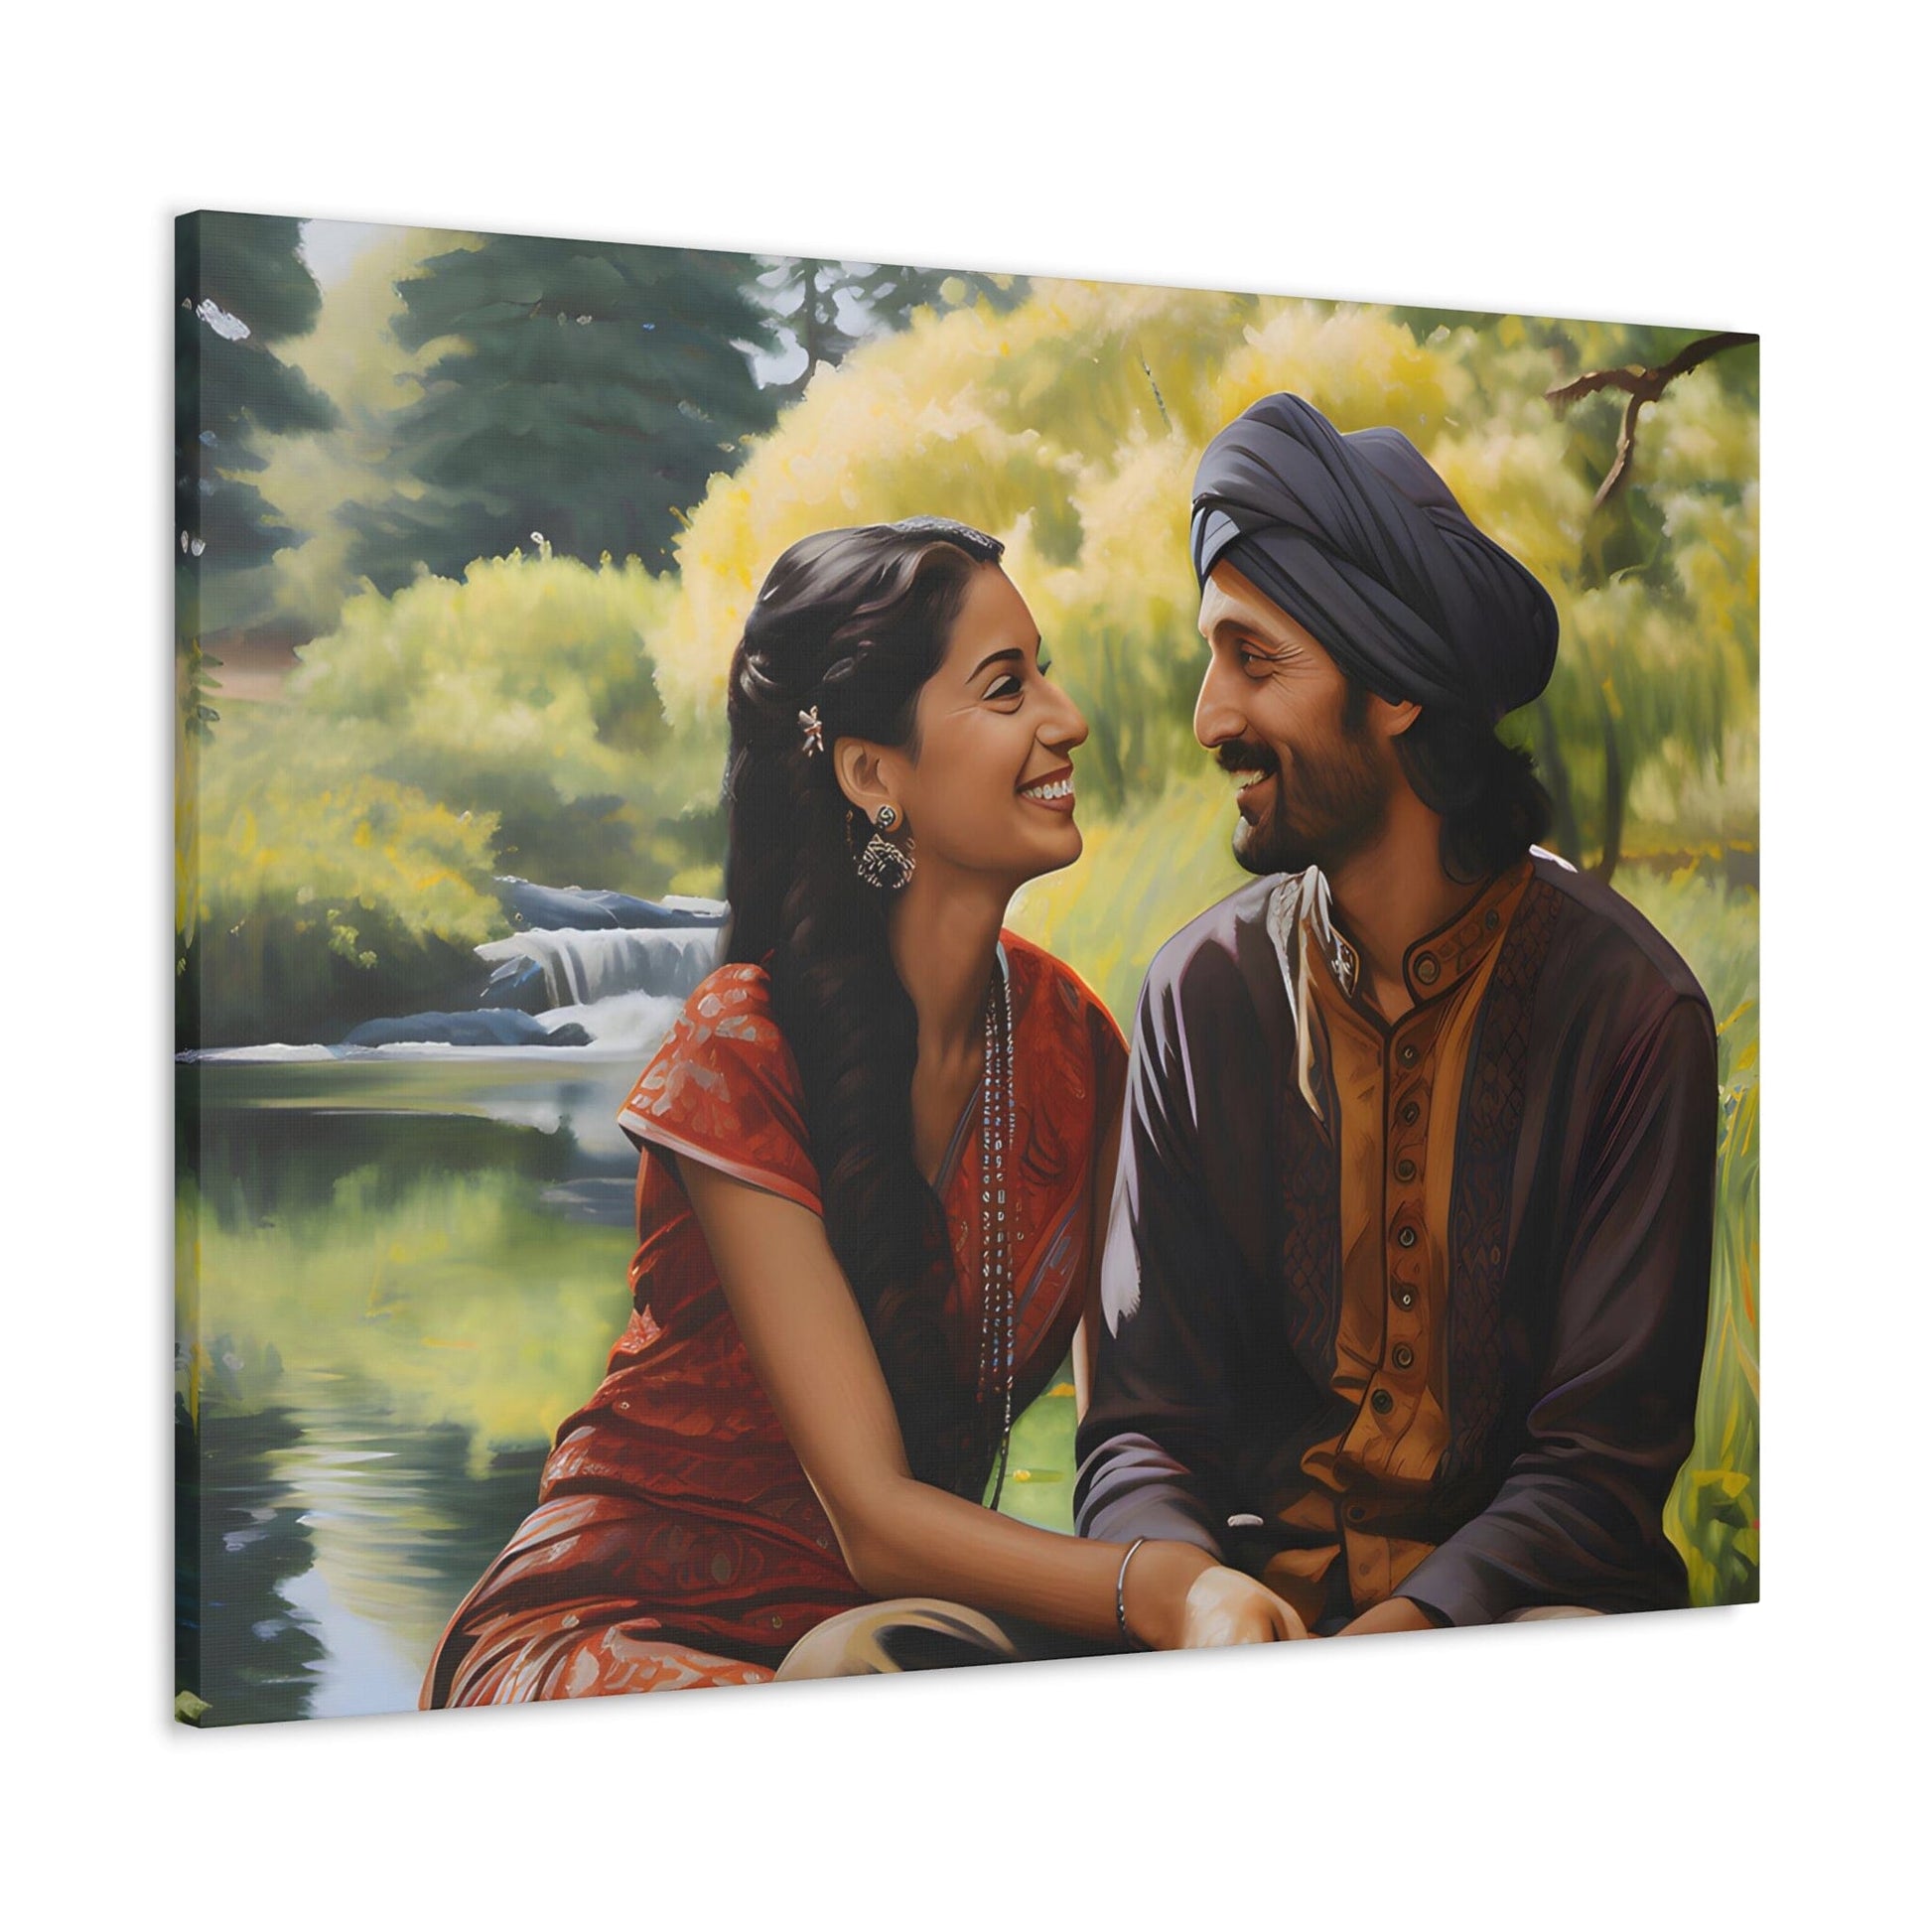 angled shot Canvas by Aravind Patel depicting a young Indian couple enjoying a serene moment in a park, surrounded by tall trees and a reflective pond, capturing the essence of romantic serenity.